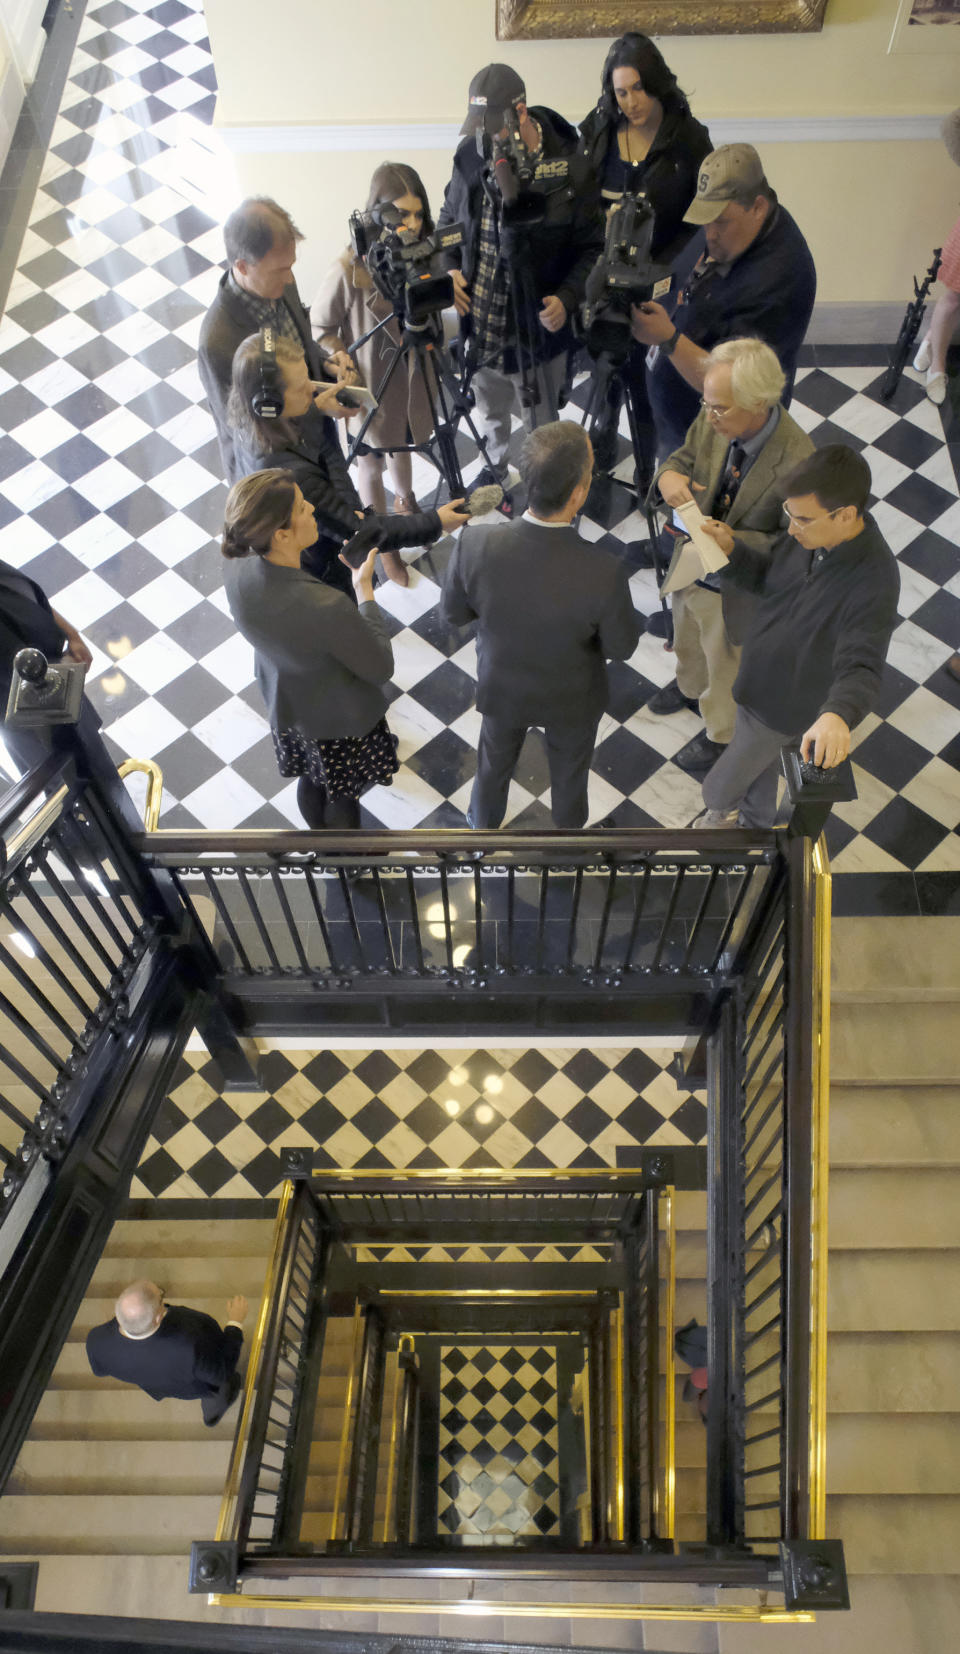 Gov. Ralph Northam , back to camera, talks with members of the media in a hallway after a press conference at the State Capitol Monday, Jan. 6, 2020 where he previewed his voting legislative proposals, including removing Lee-Jackson Day as a state holiday and replacing it with election day. (Bob Brown/Richmond Times-Dispatch via AP)